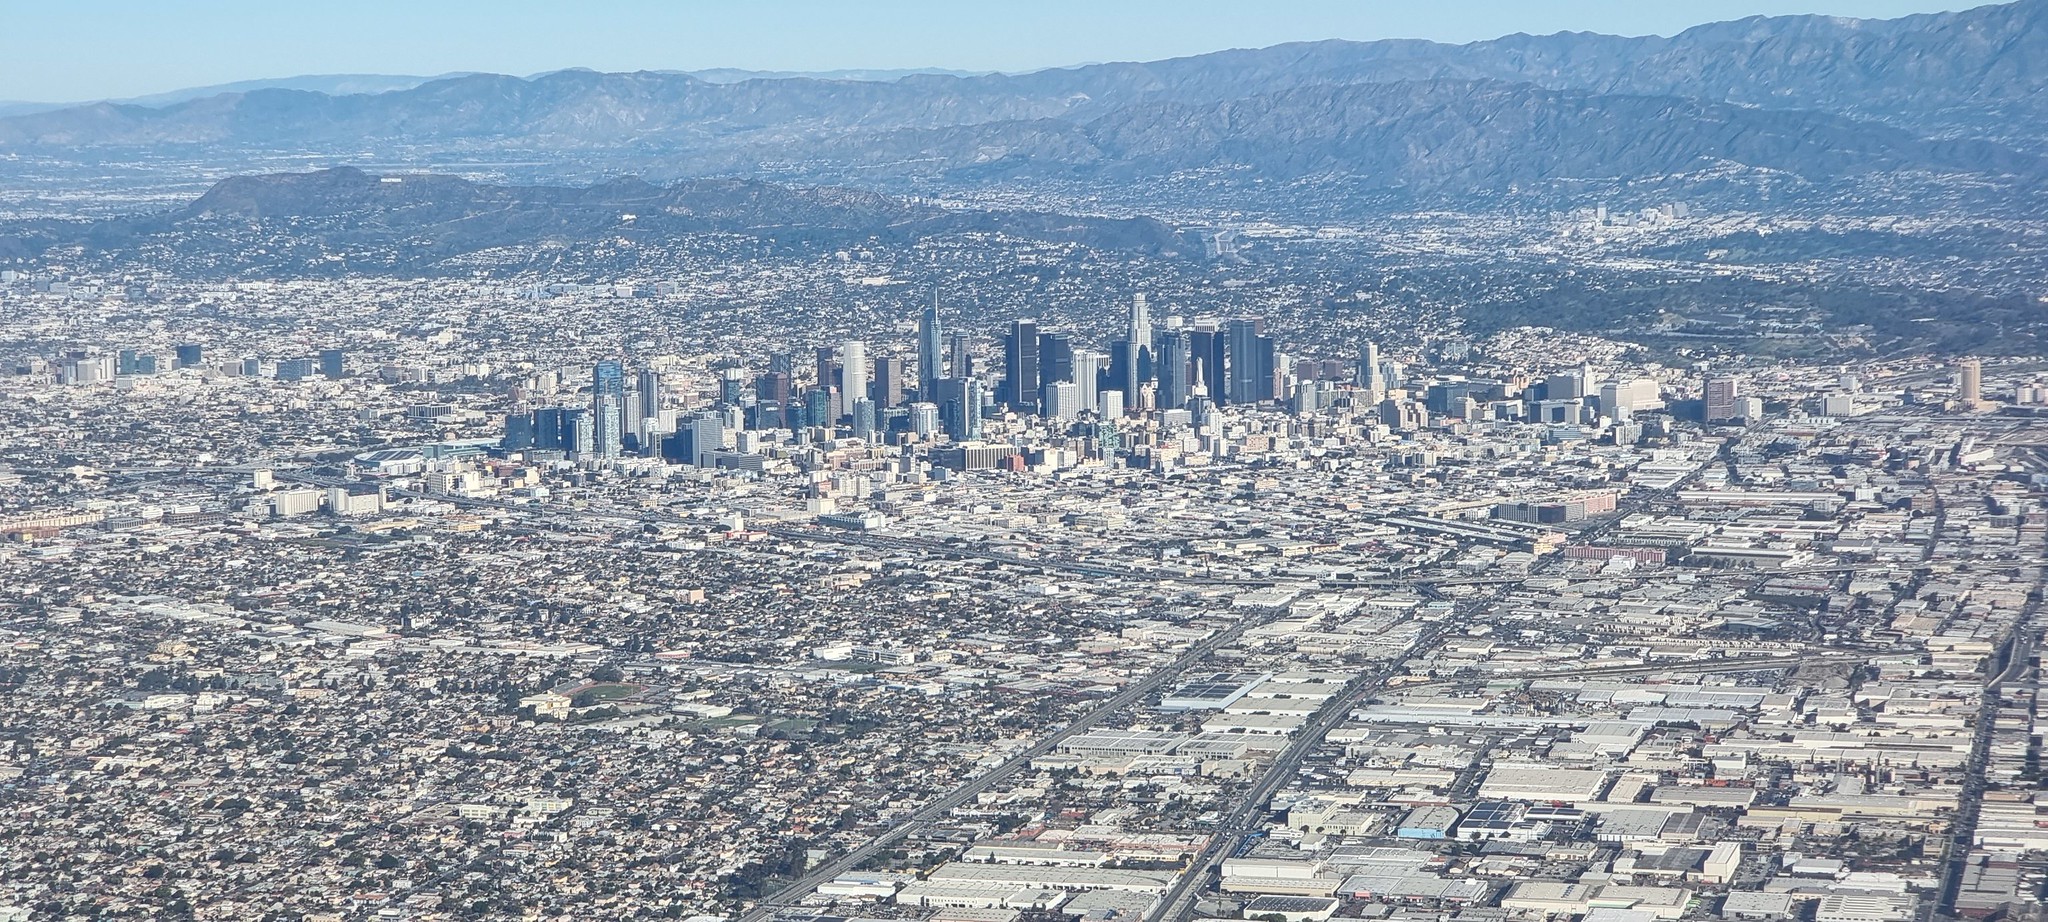 A view of Los Angeles on final approach